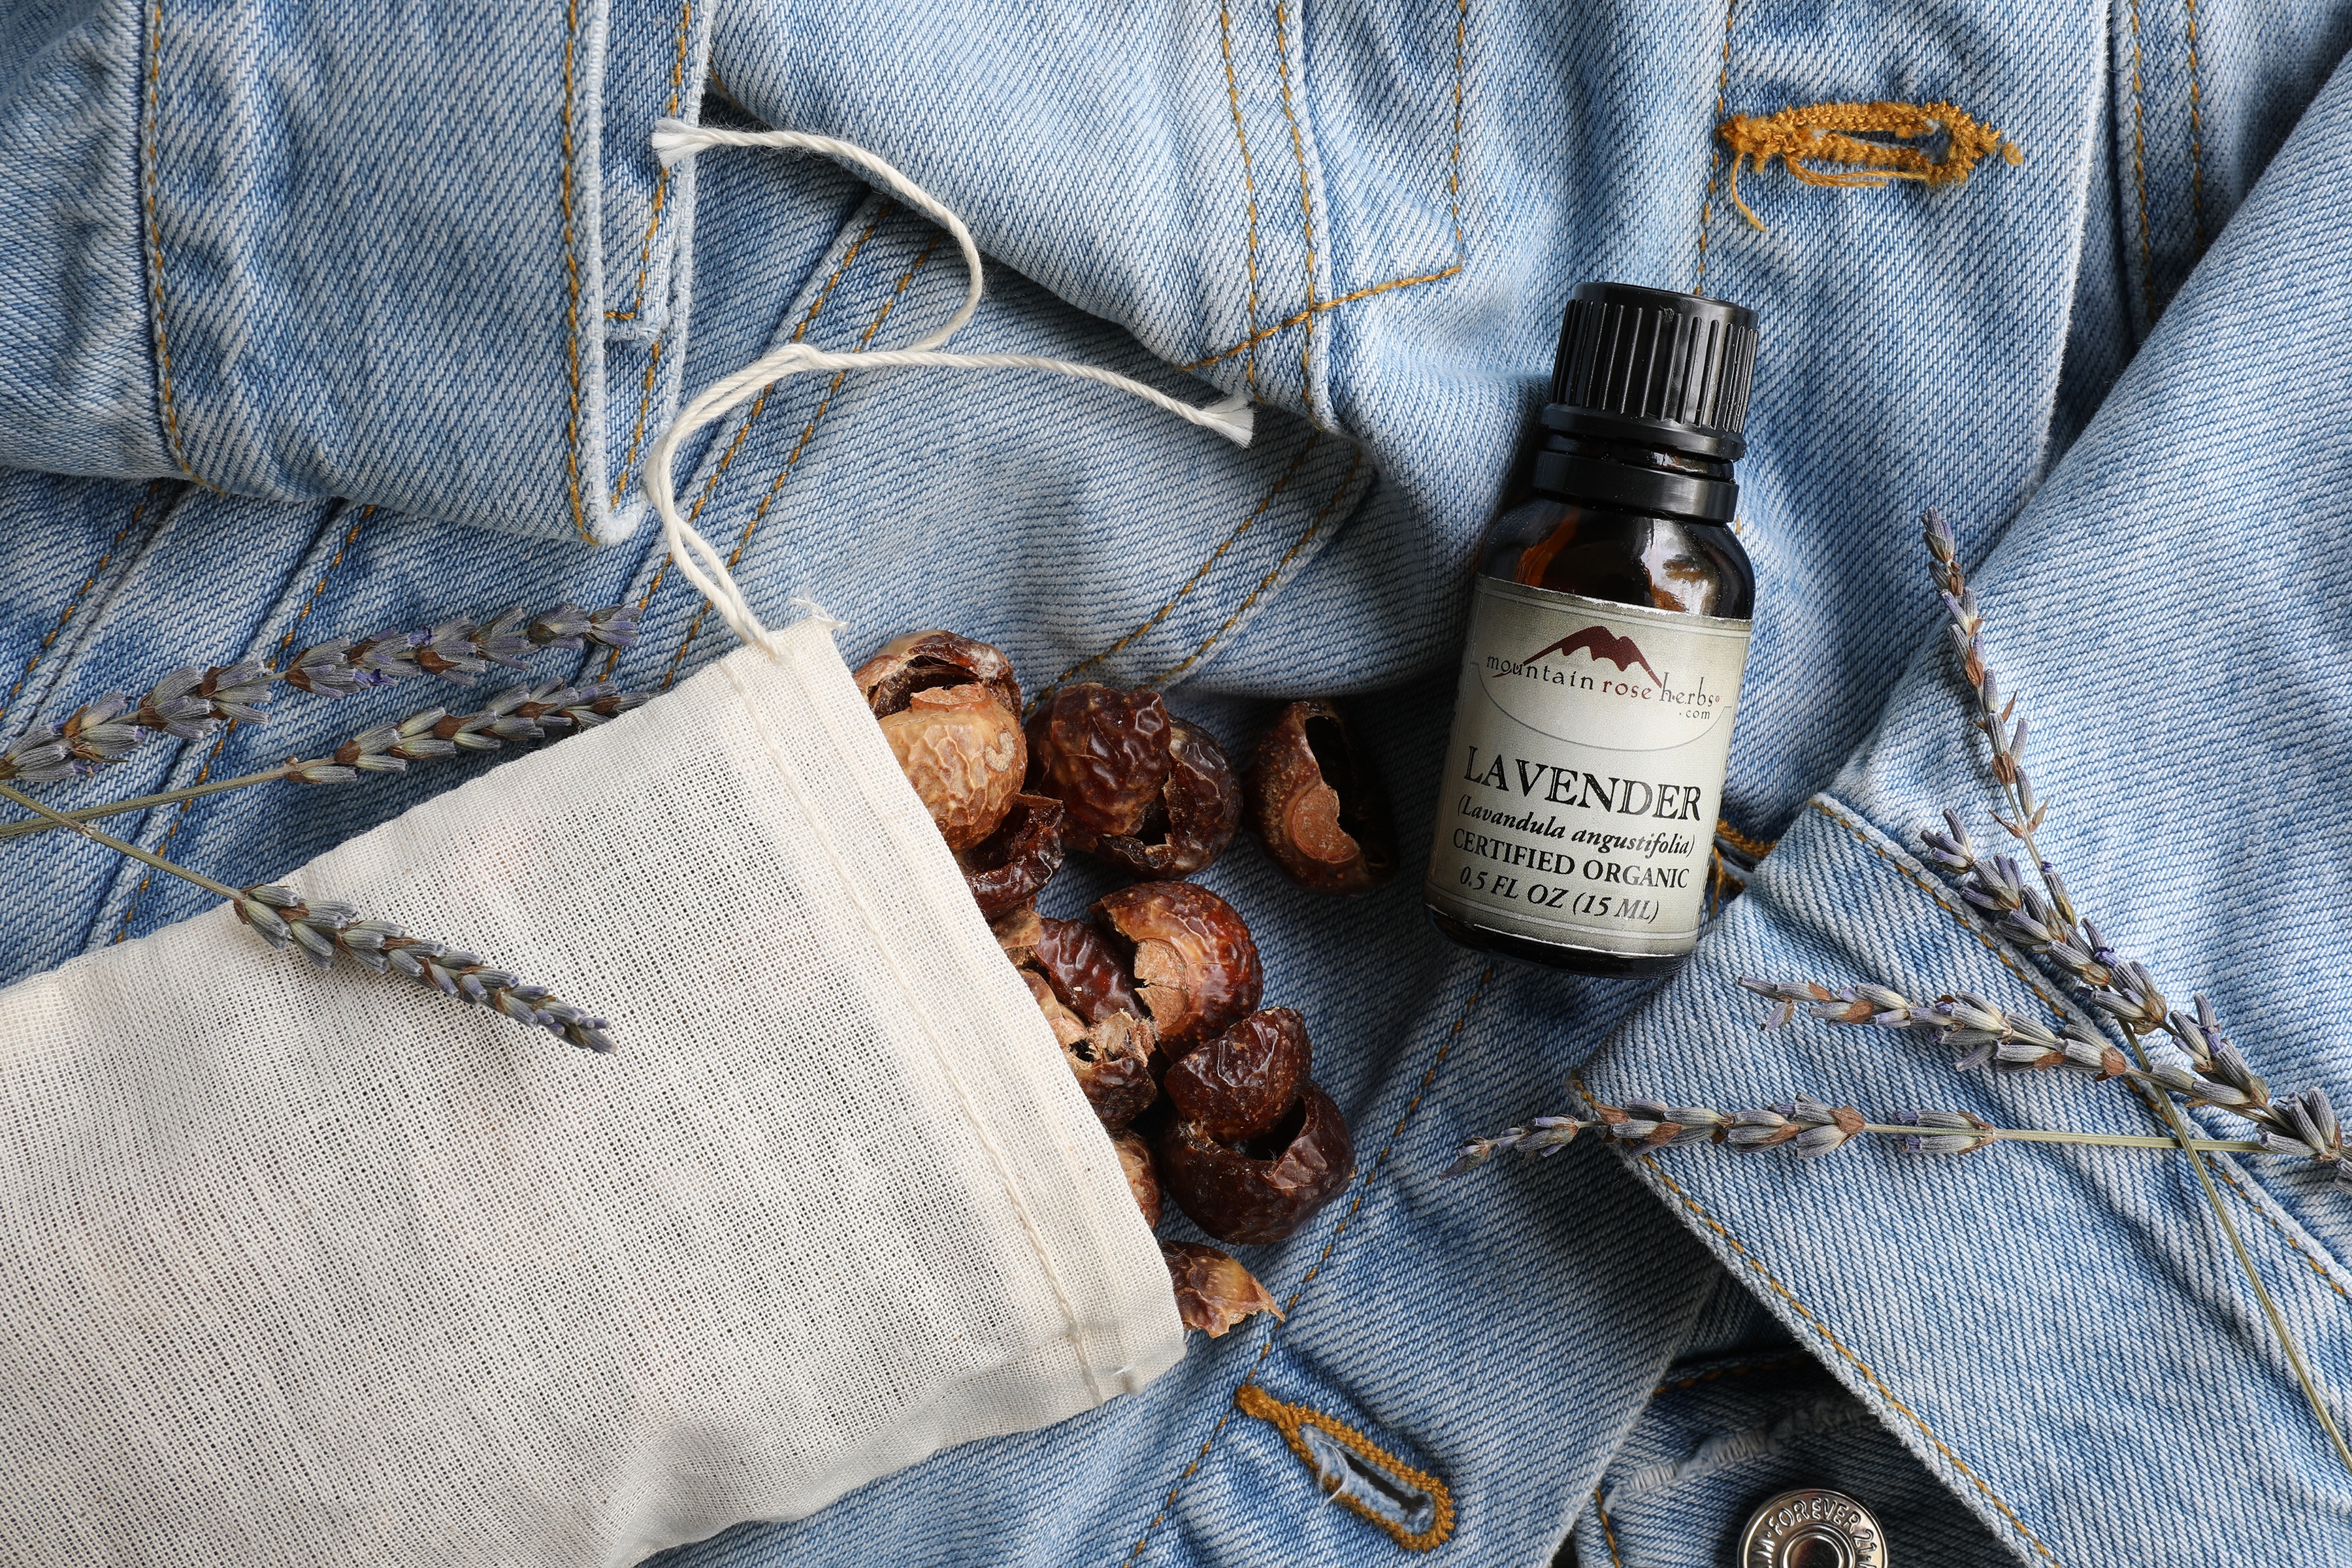 Soap Nuts: A Natural DIY Option for Your Laundry